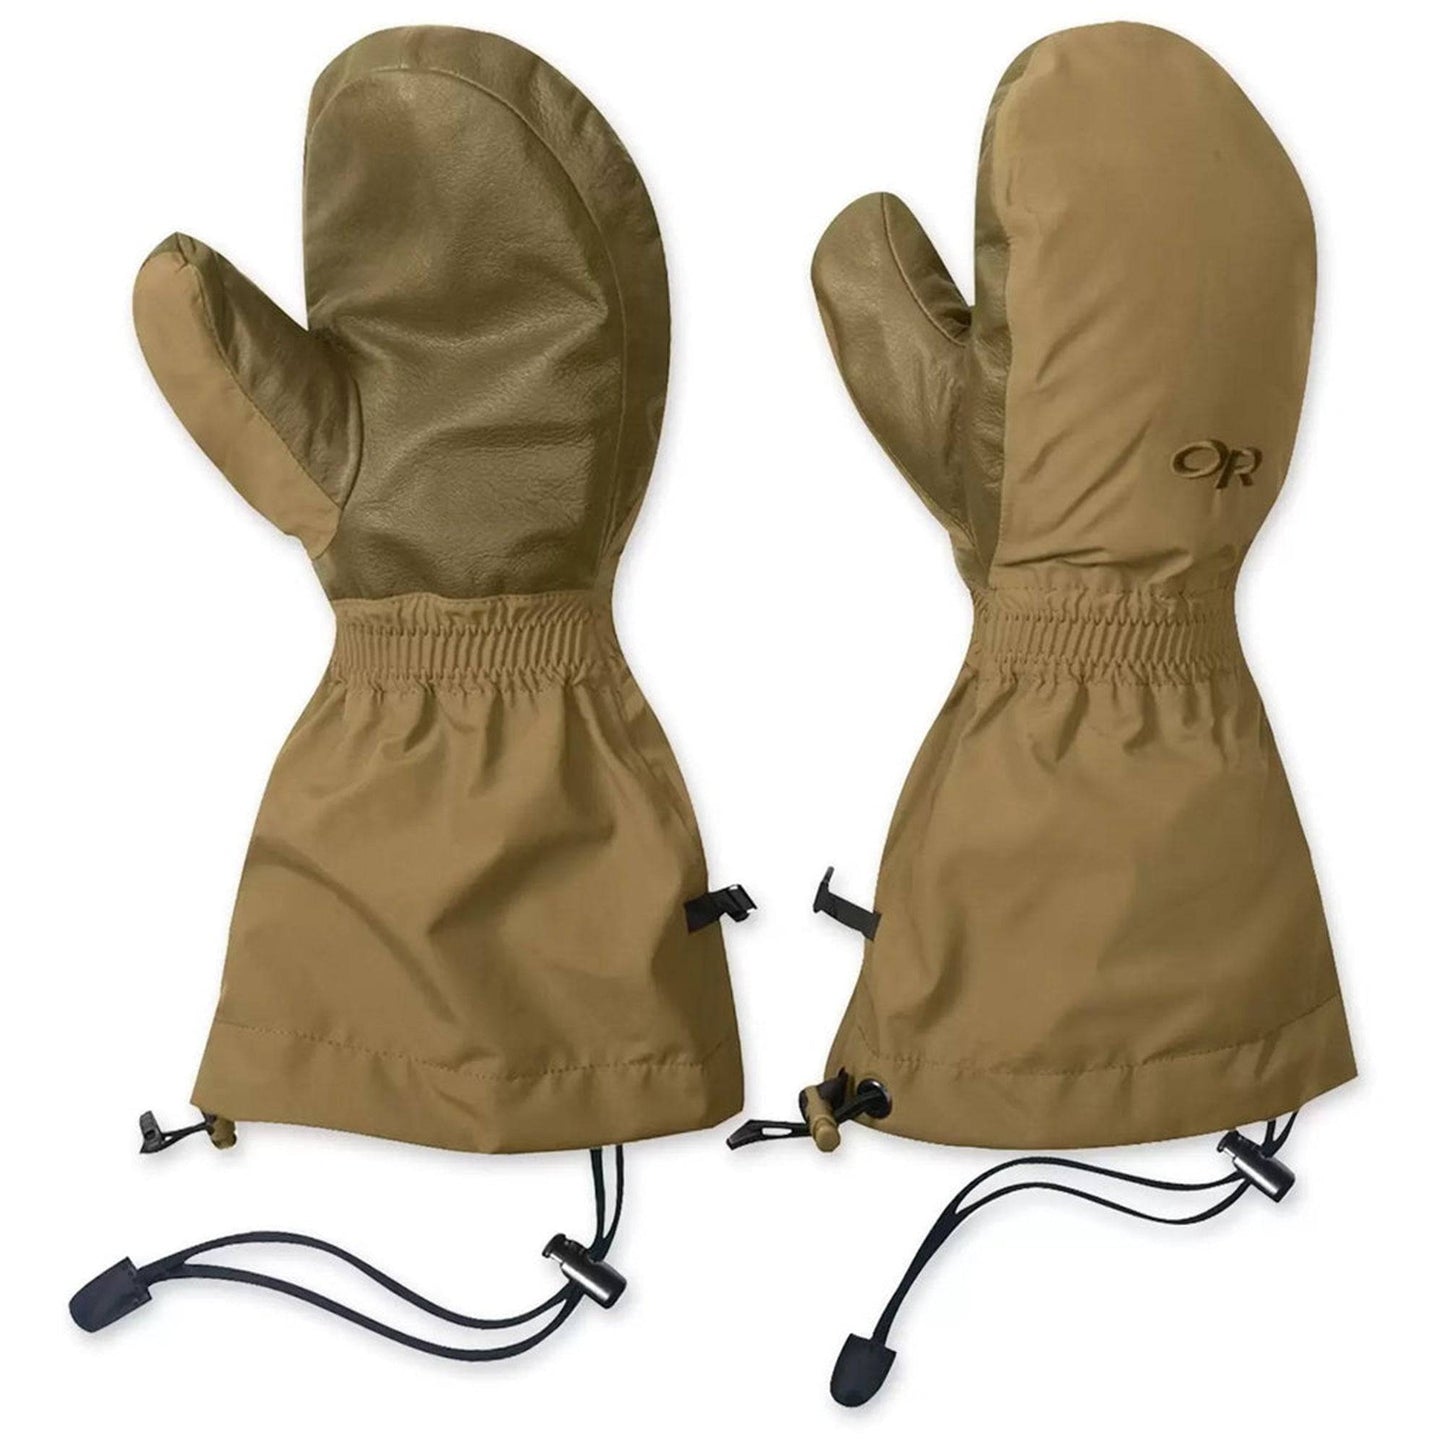 Outdoor Research Gore-Tex Windproof/Waterproof Military Winter Mittens Gloves LG - USA Supply